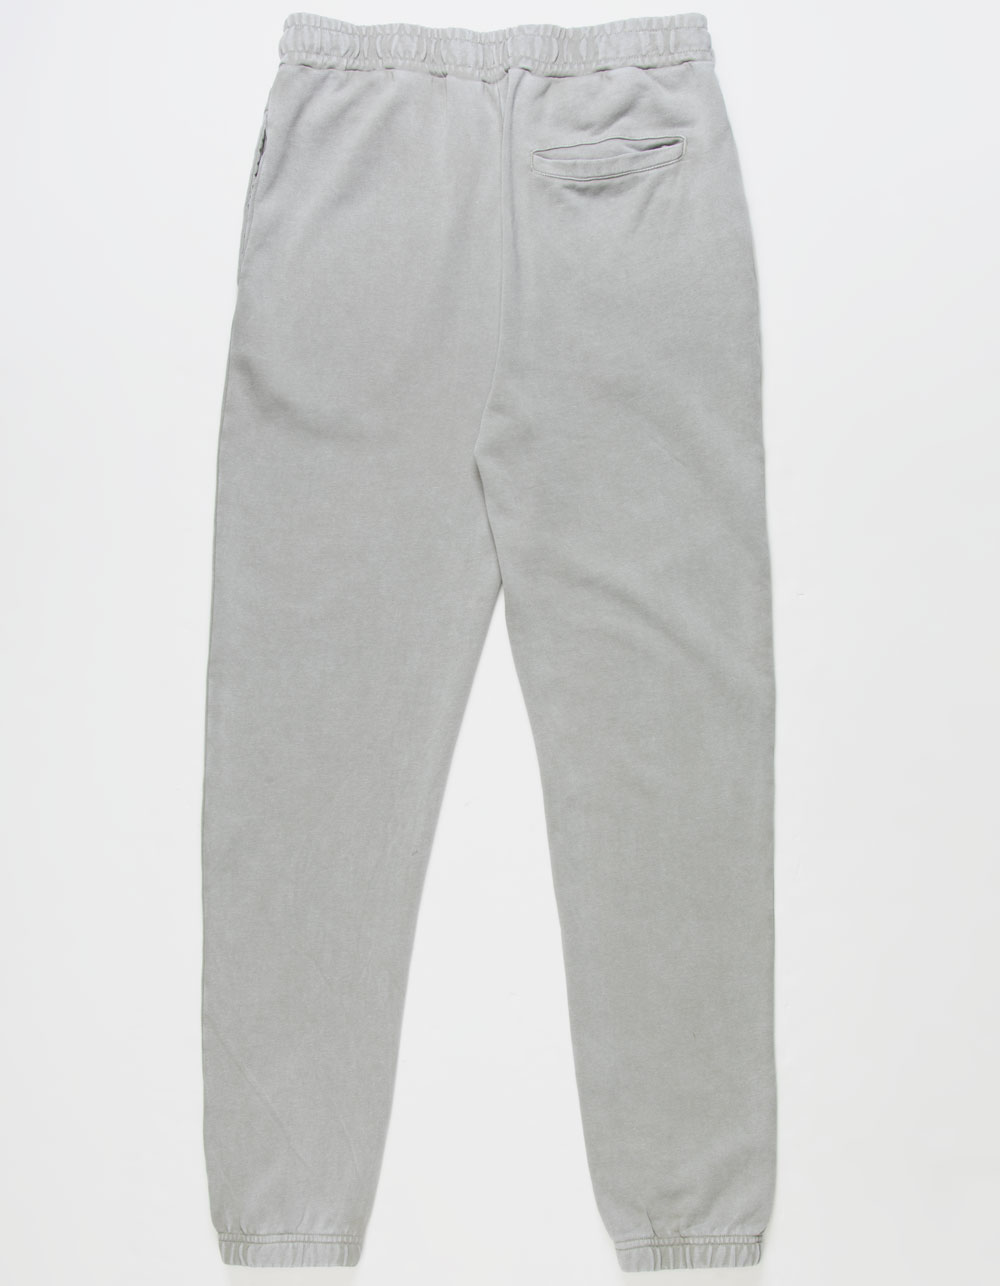 DEATH ROW RECORDS Greatest Hits Mens Sweatpants - HEATHER GRAY | Tillys